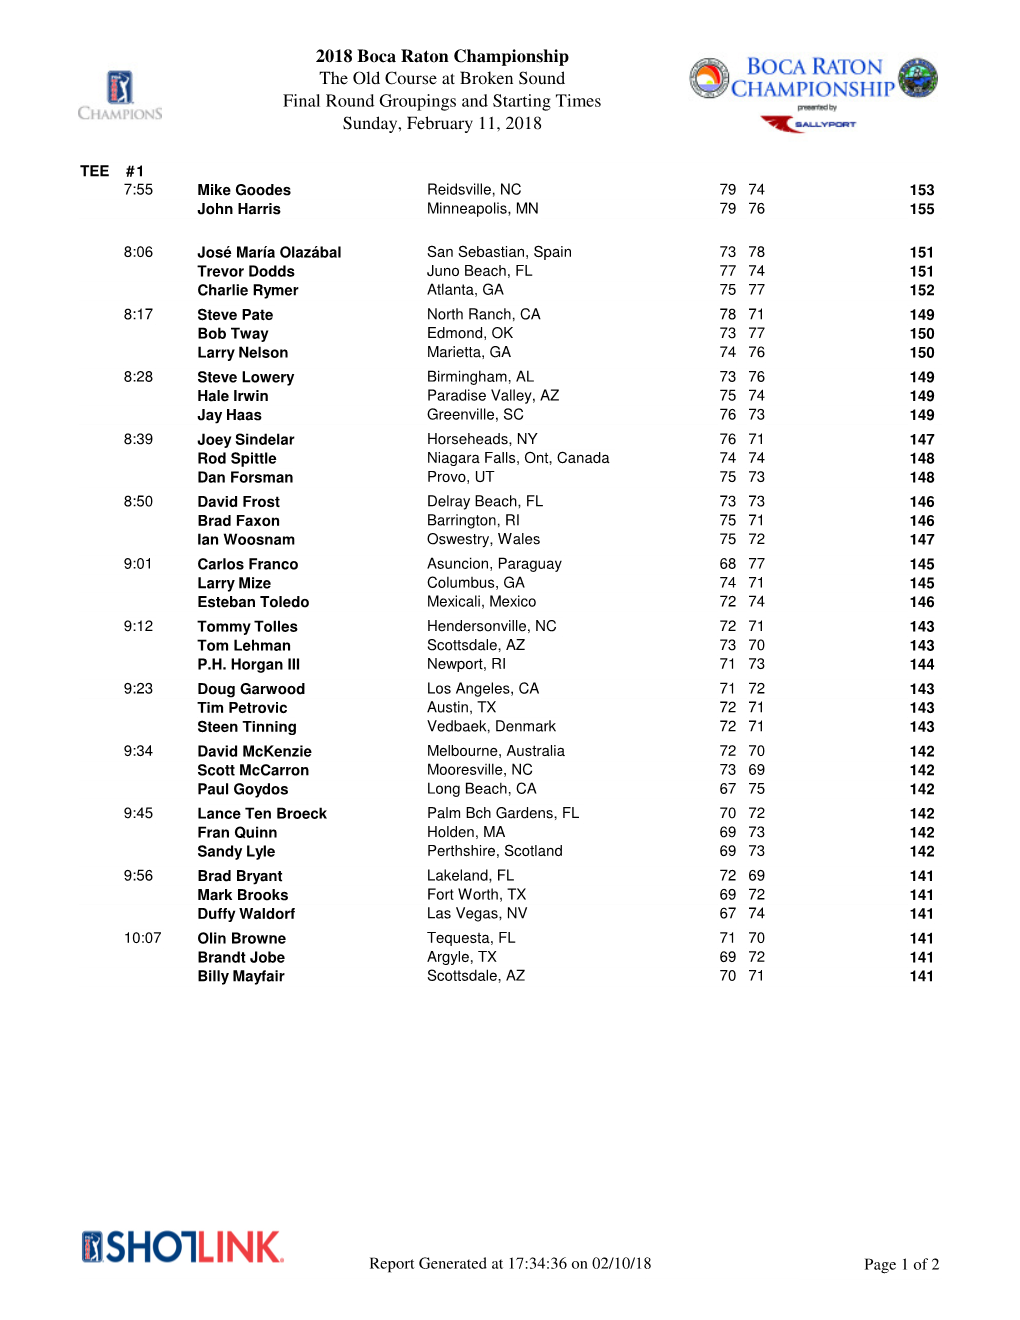 2018 Boca Raton Championship the Old Course at Broken Sound Final Round Groupings and Starting Times Sunday, February 11, 2018